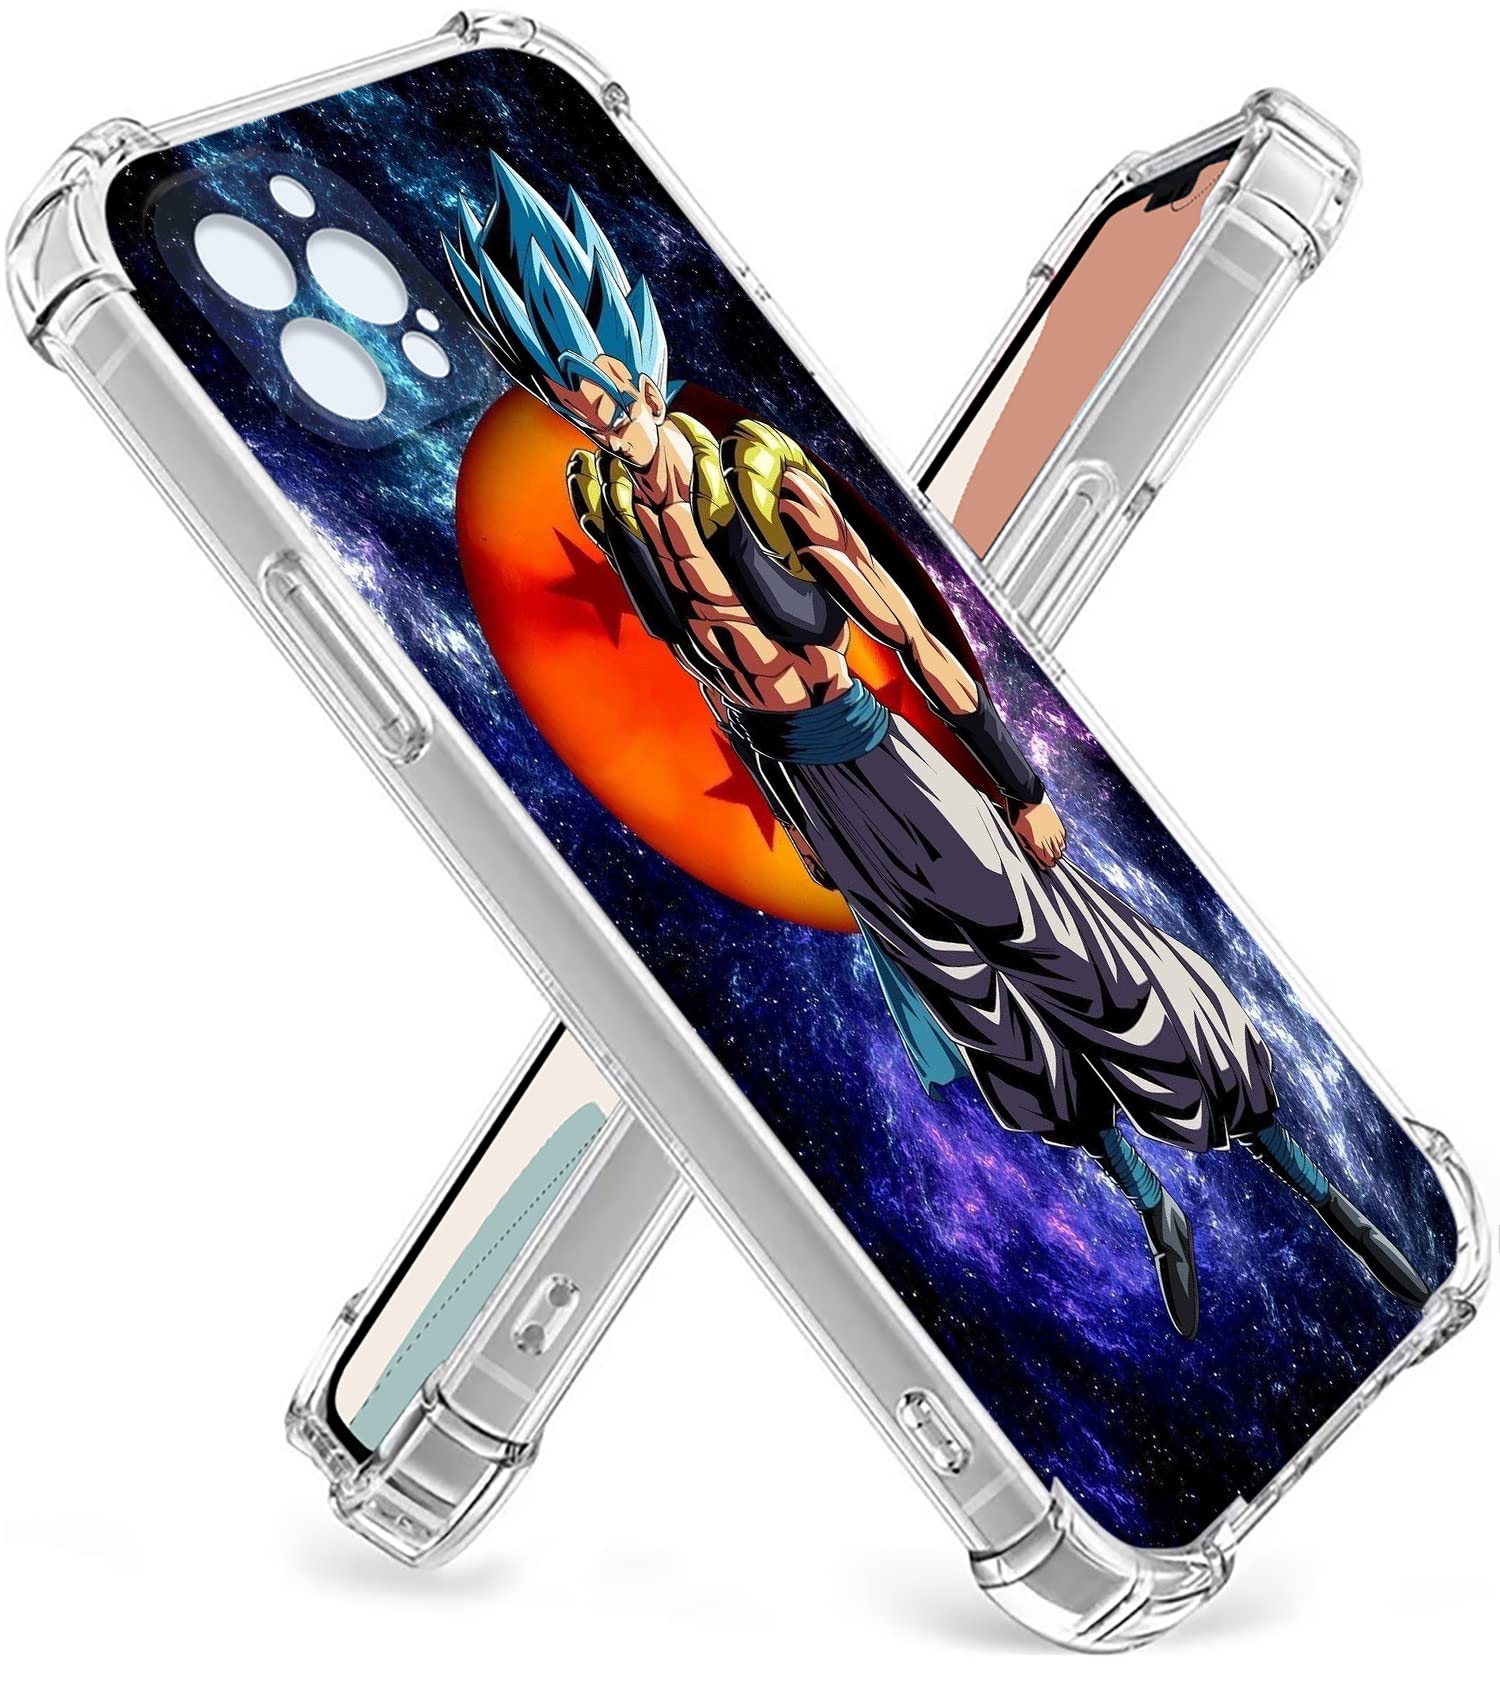 Generic Anime Naruto Case For Iphone Xs Max Xr X 10 6 6s 7 7s 8 5s | Jumia  Nigeria